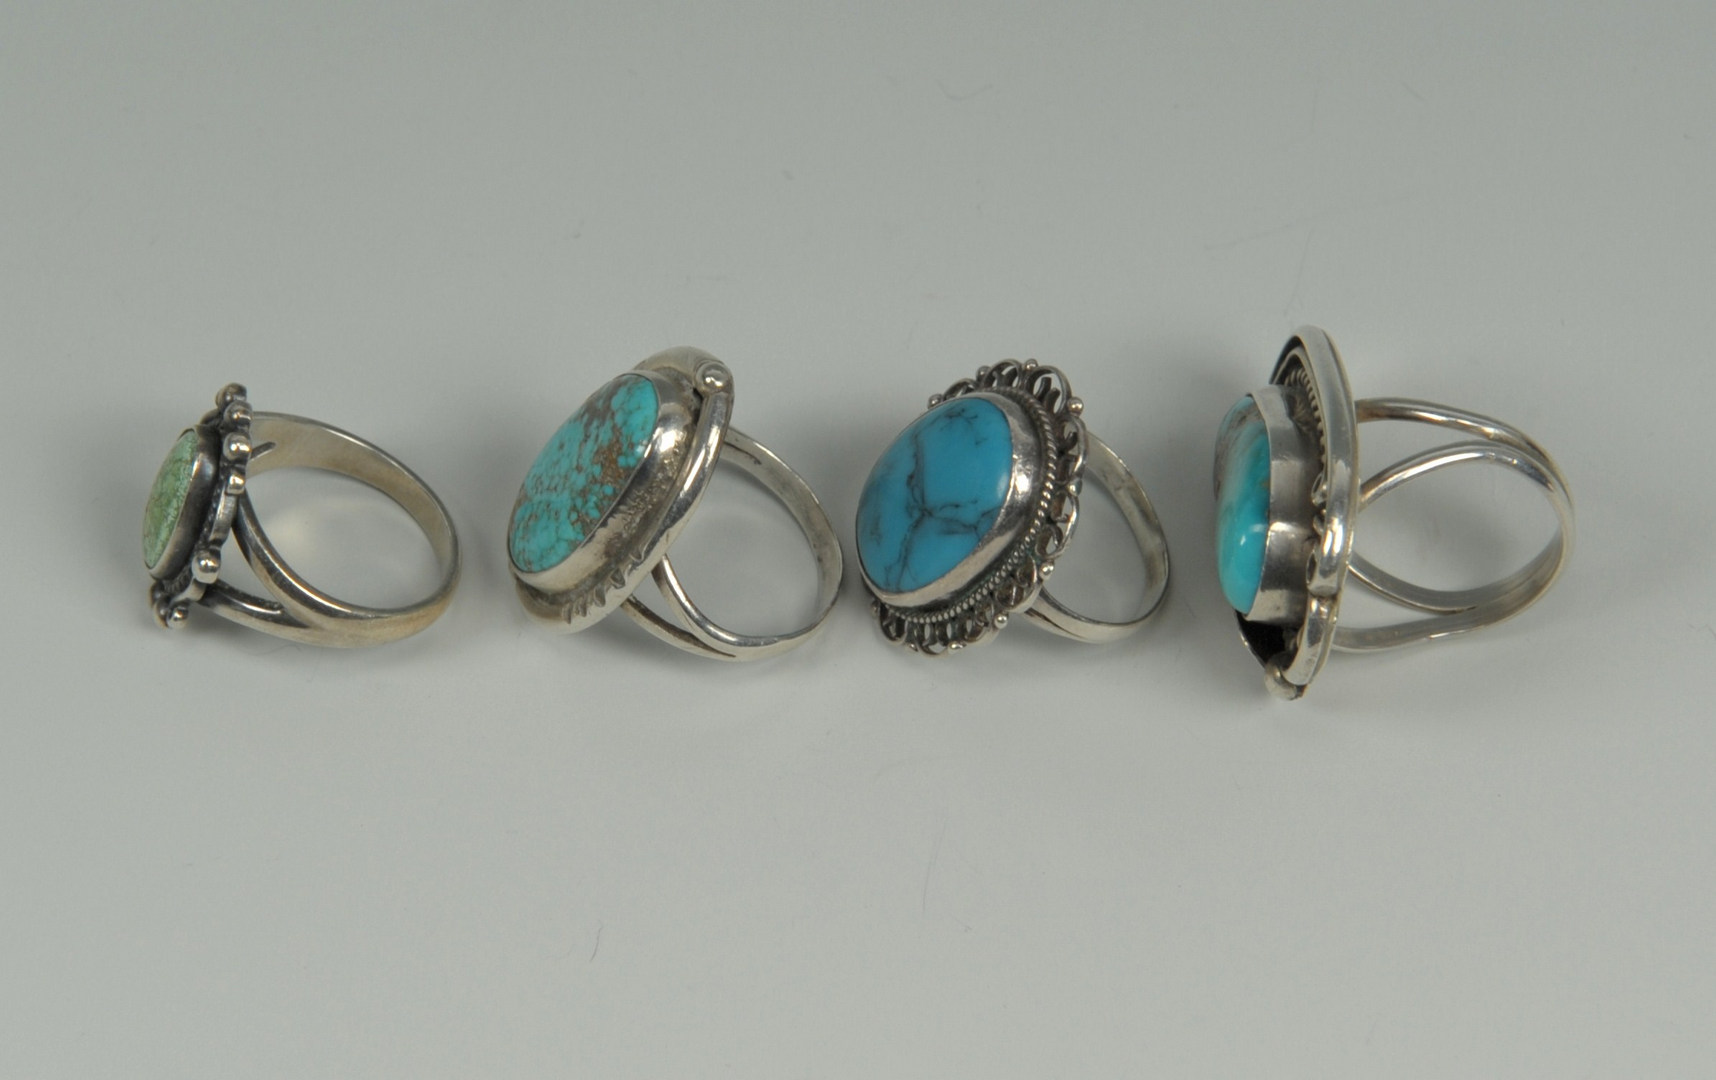 Lot 386: Group of Southwestern Turquoise jewelry